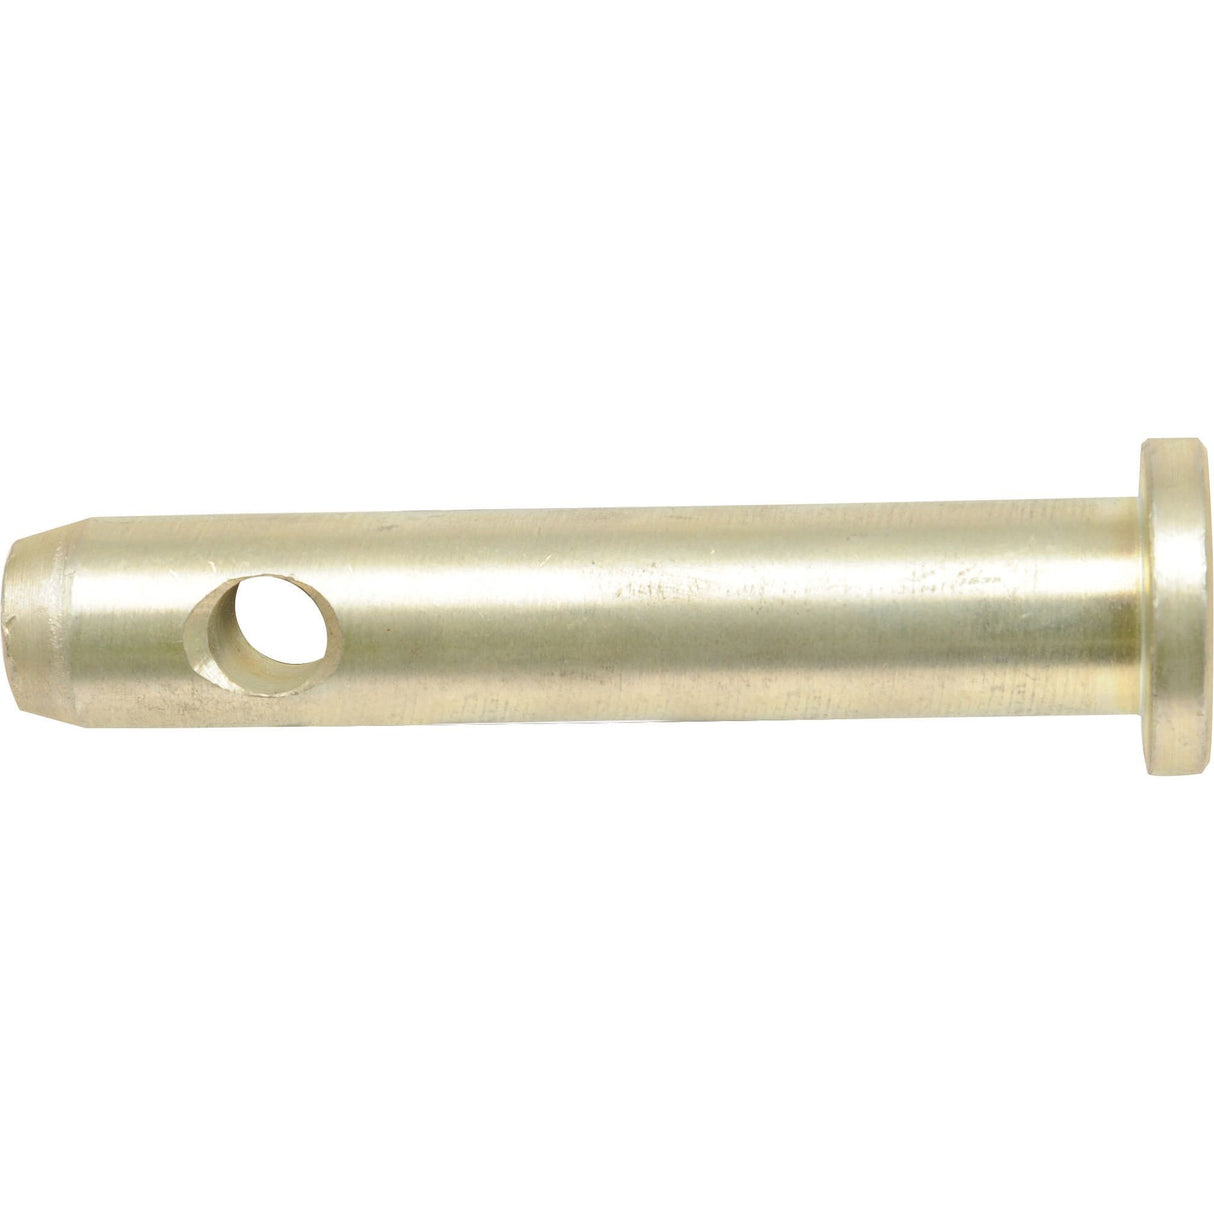 Top link pin - Dual category 19 - 25mm Cat.1/2
 - S.9163 - Farming Parts